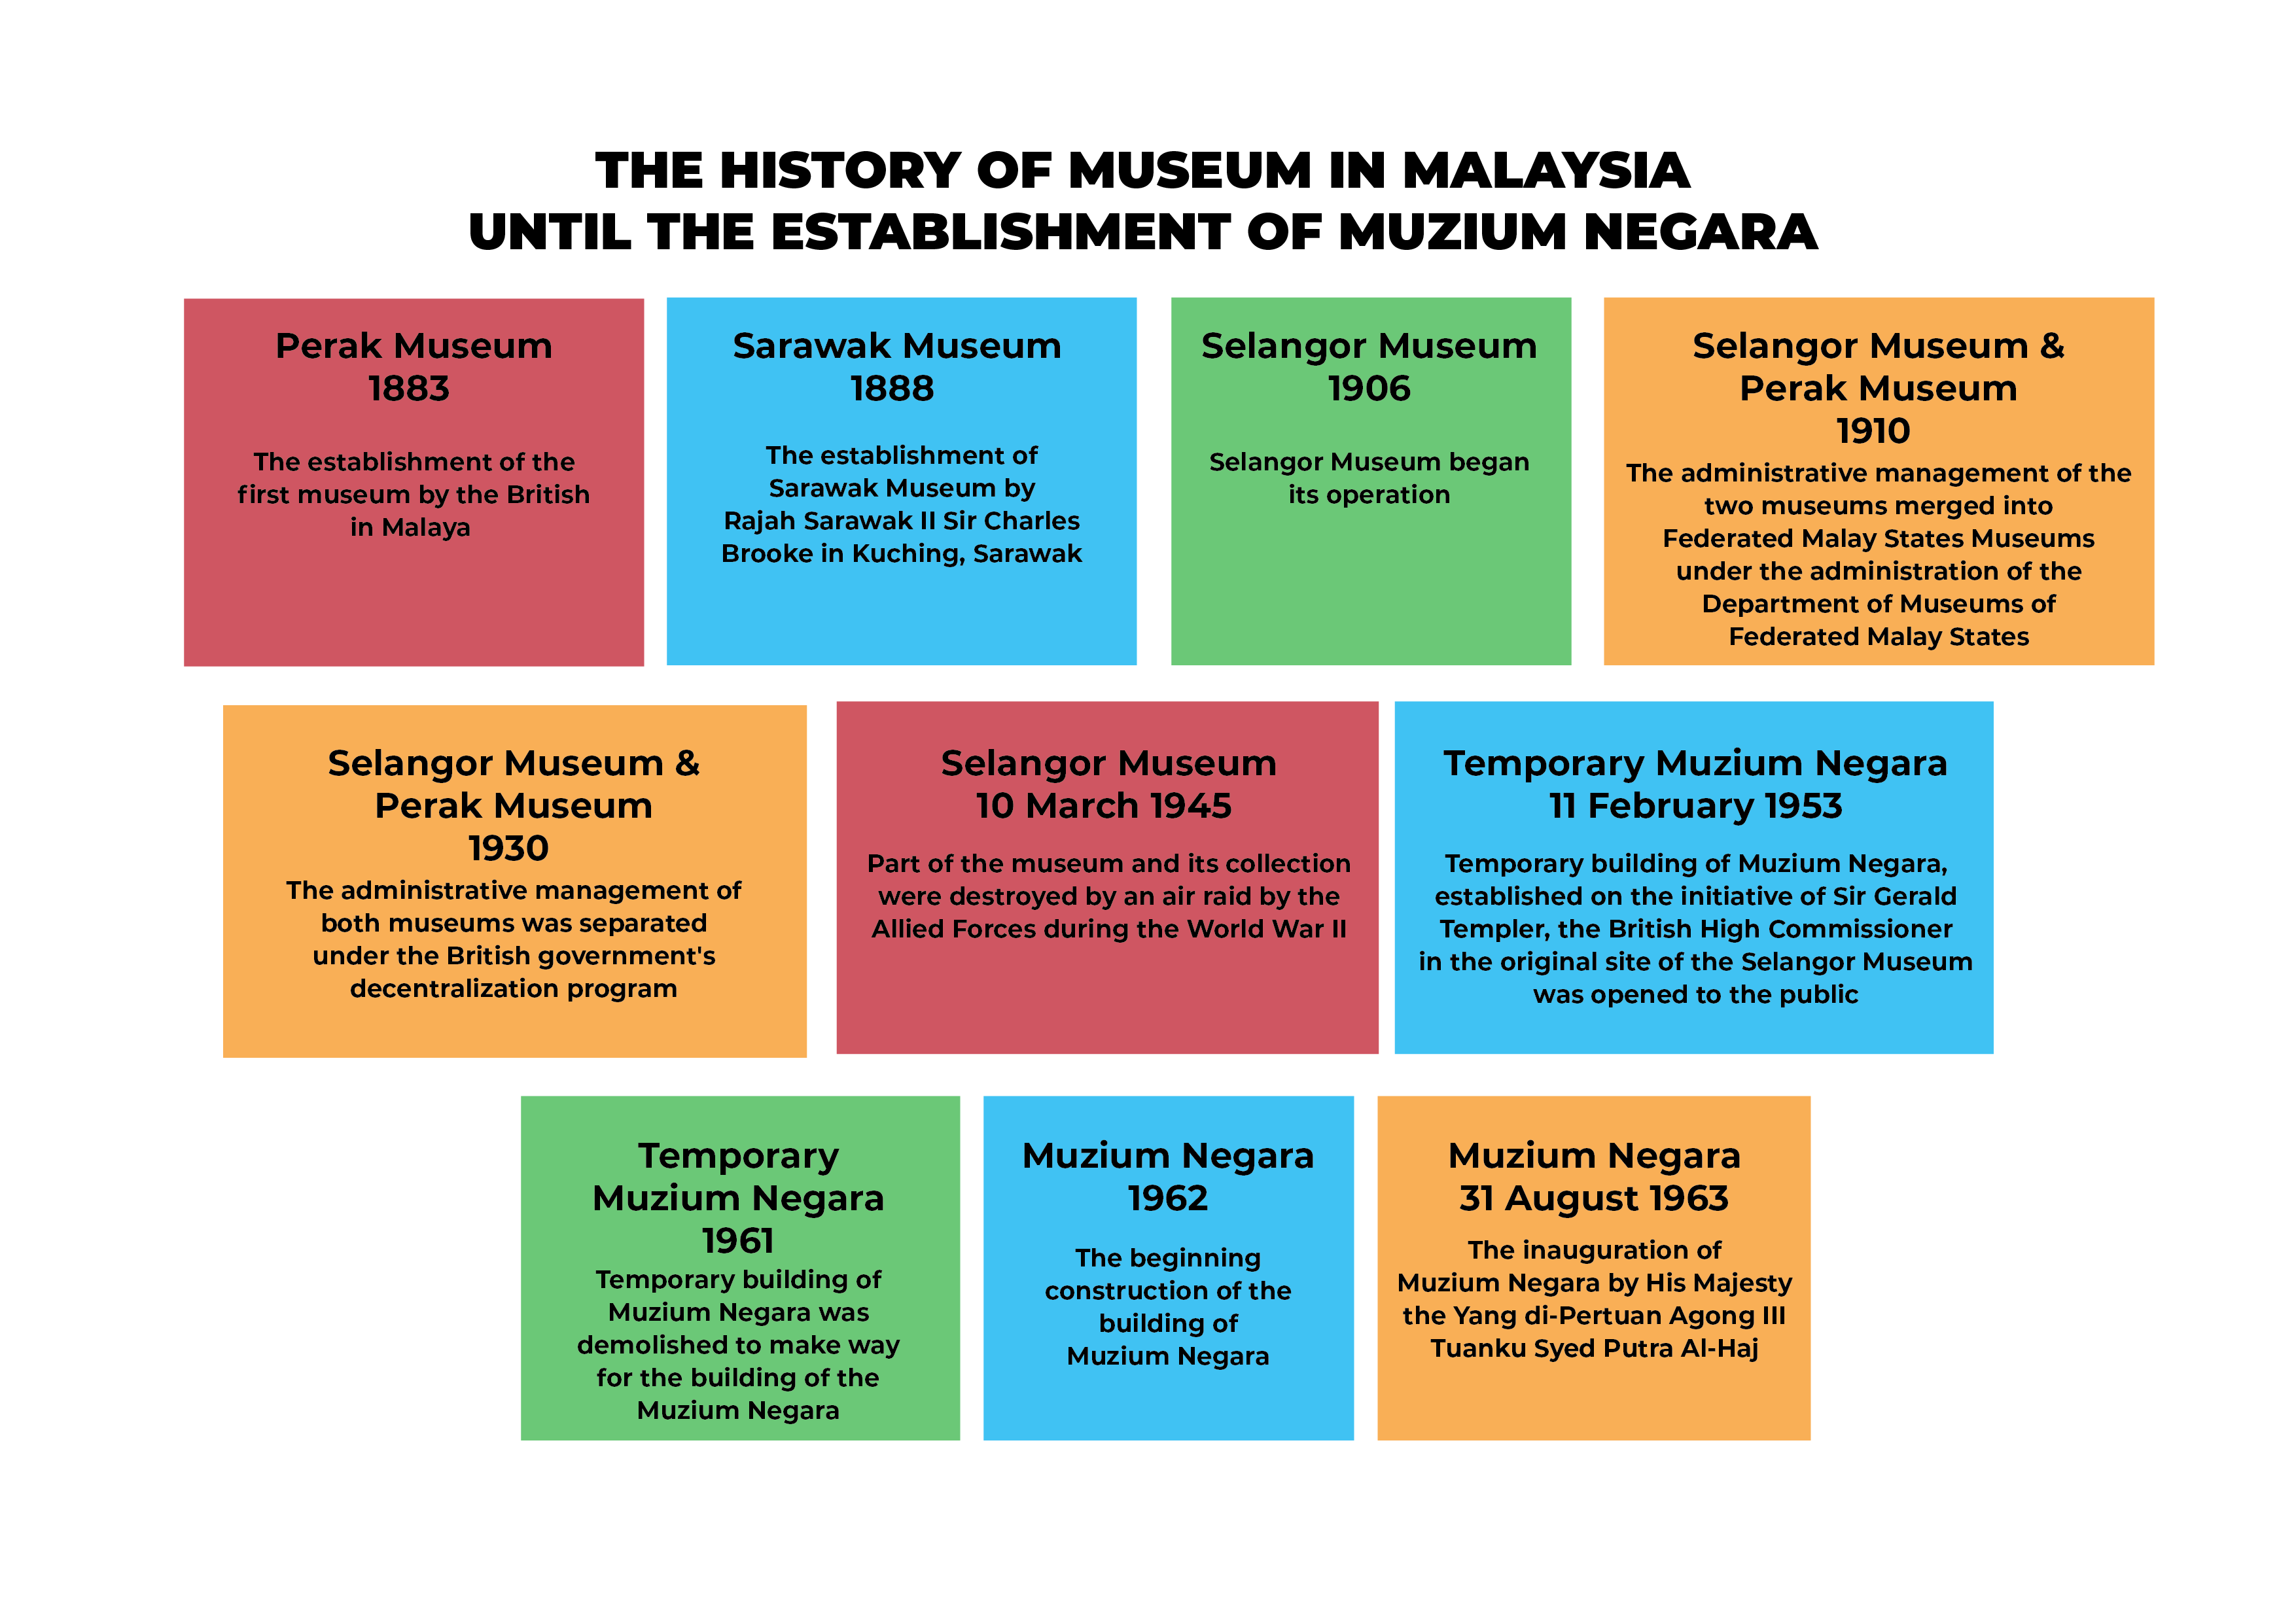 The History of The National Museum Under The Department of Museums Malaysia